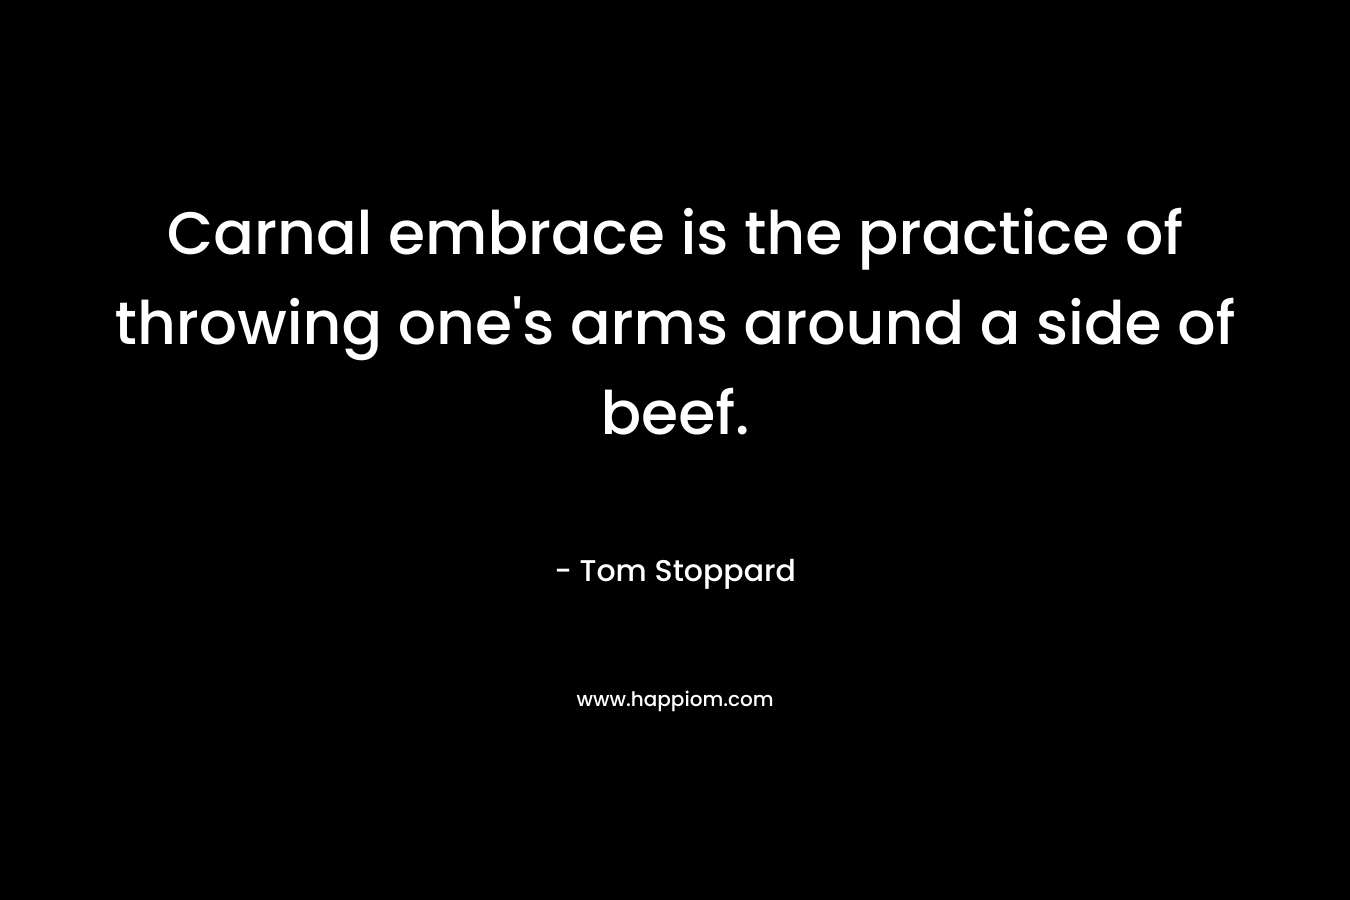 Carnal embrace is the practice of throwing one’s arms around a side of beef. – Tom Stoppard